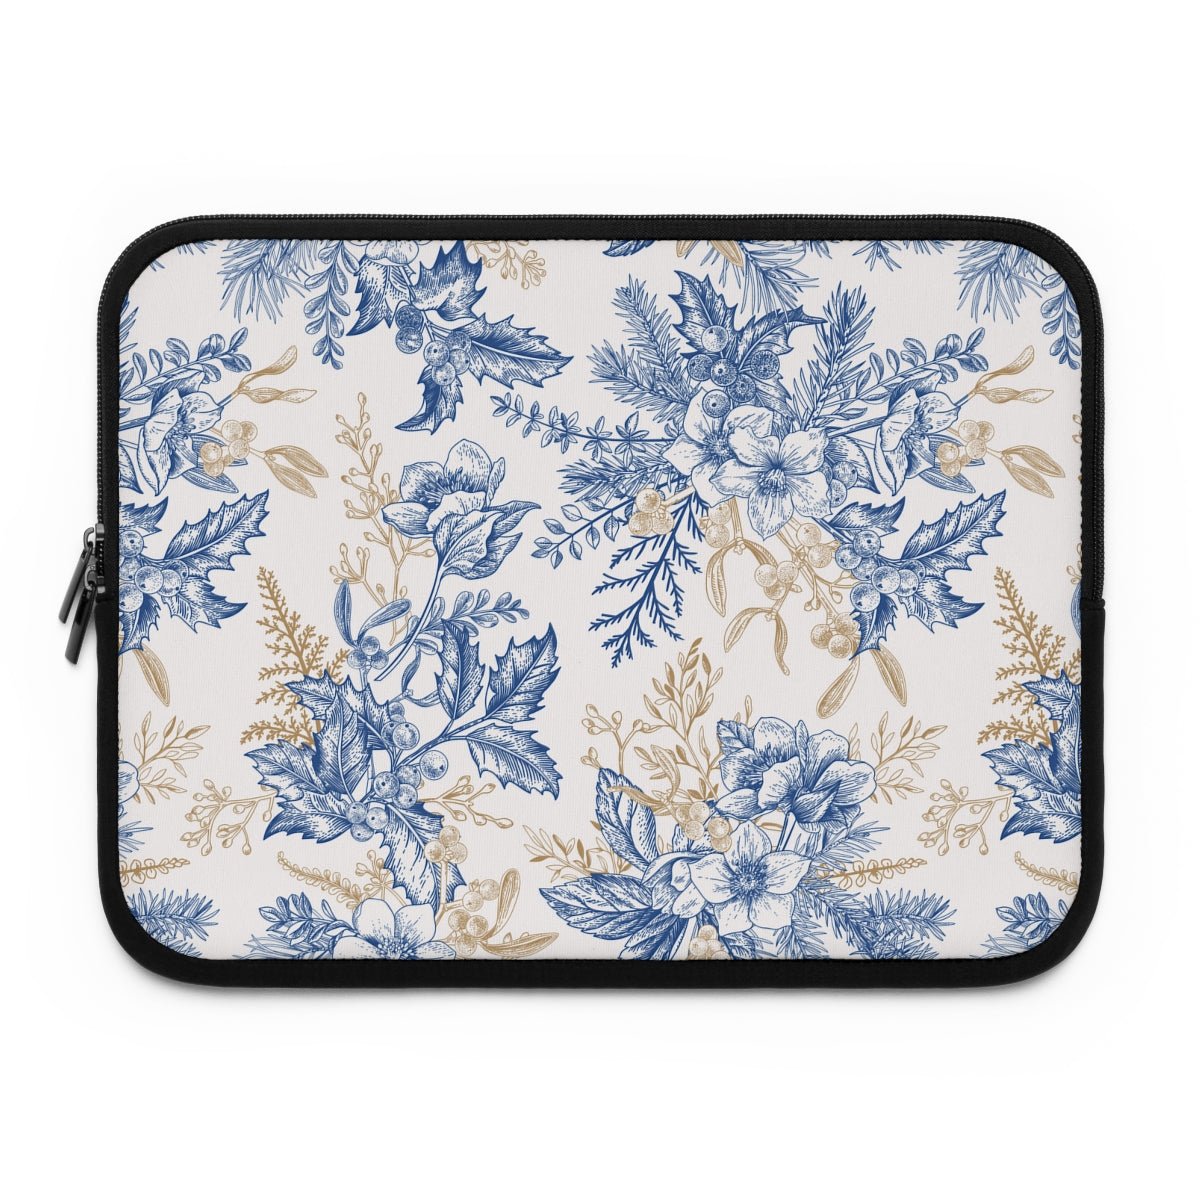 Winter Hellebore Flowers Laptop Sleeve - Puffin Lime